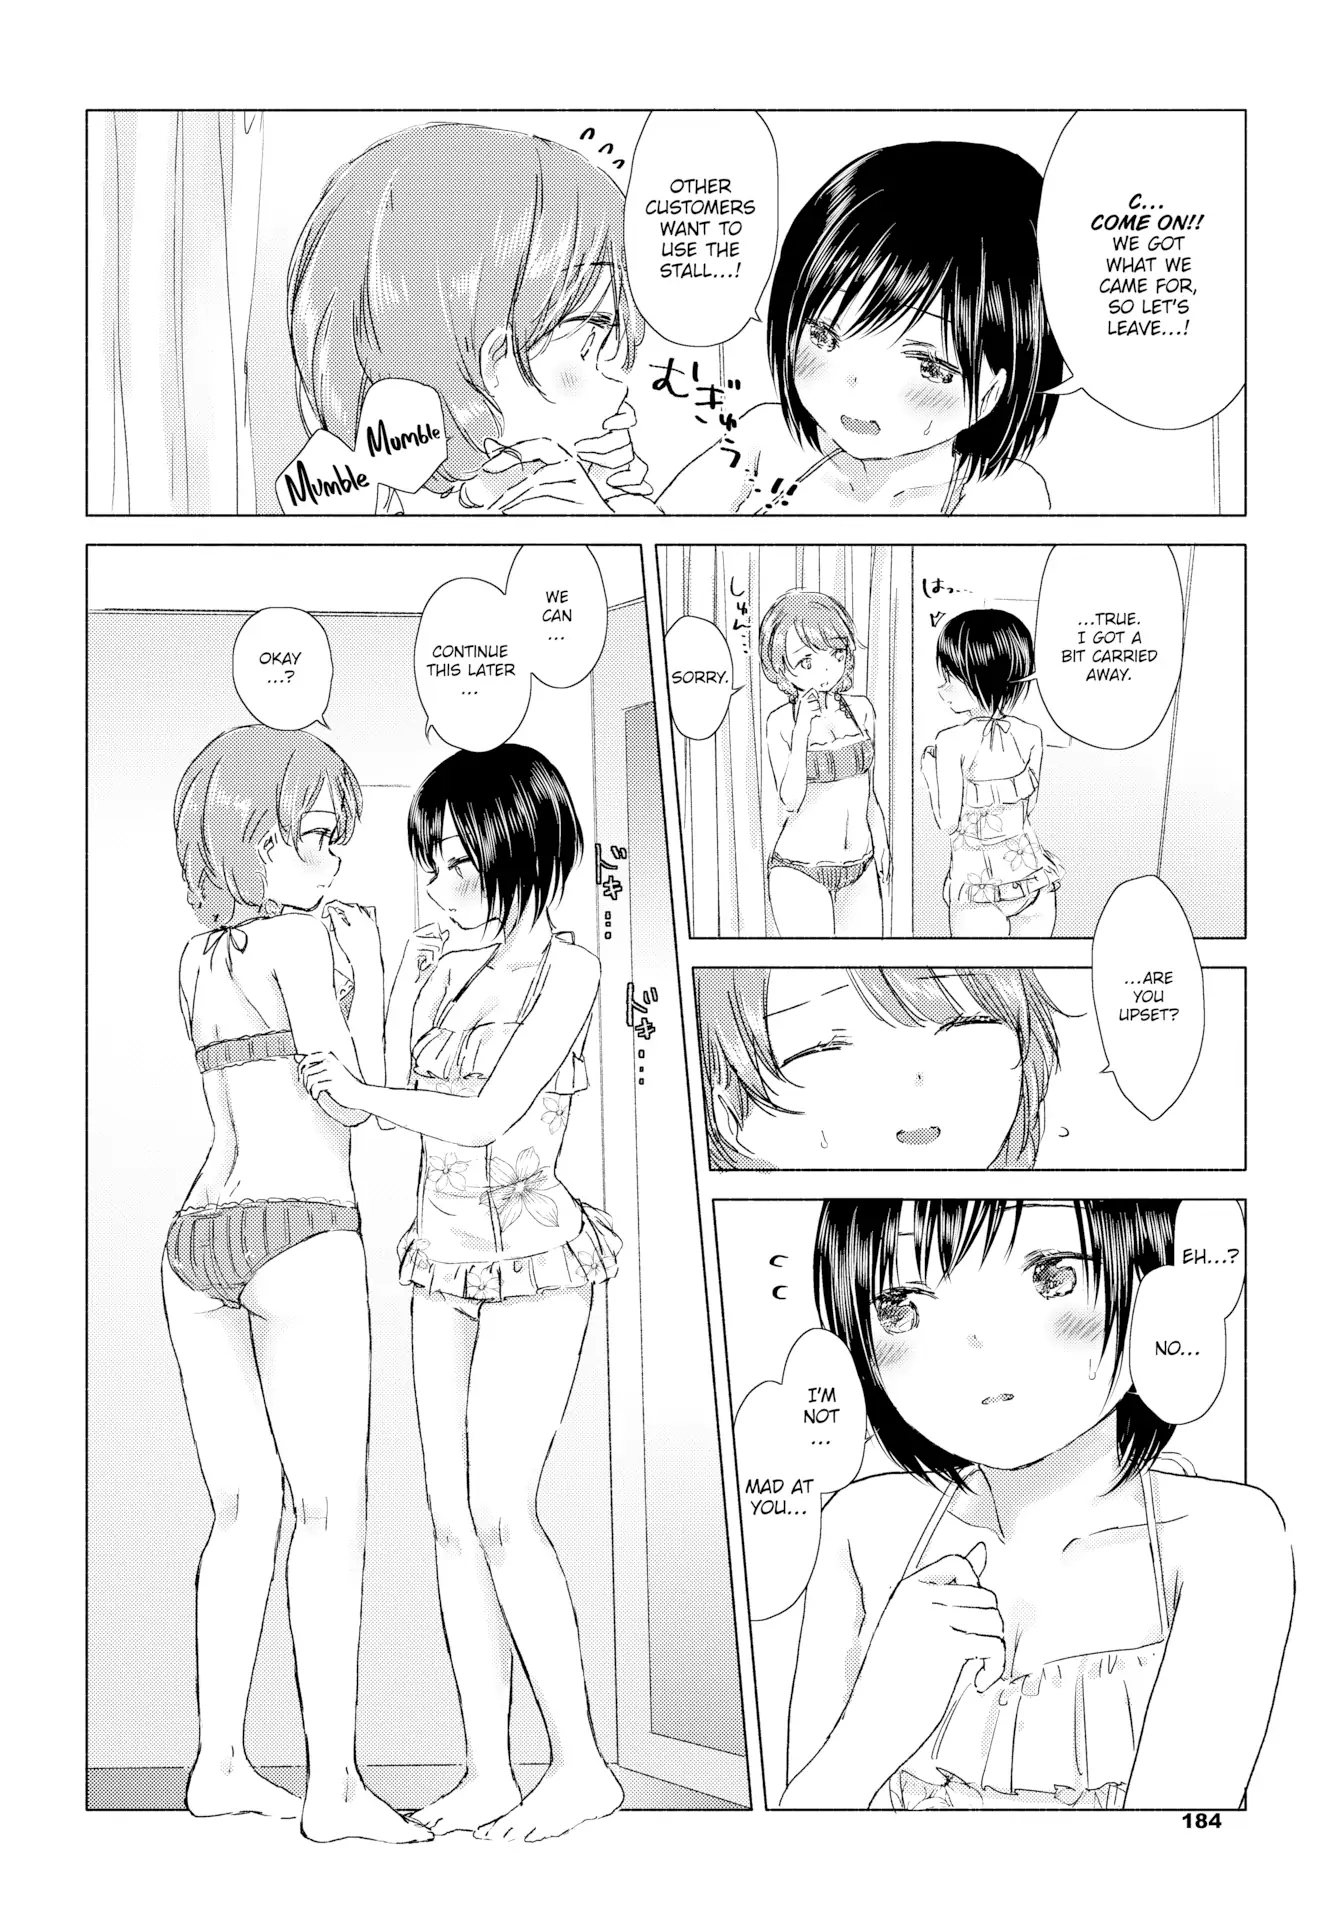 When We Get Home, Asuka-chan and I Will… Chapter 1 - page 6